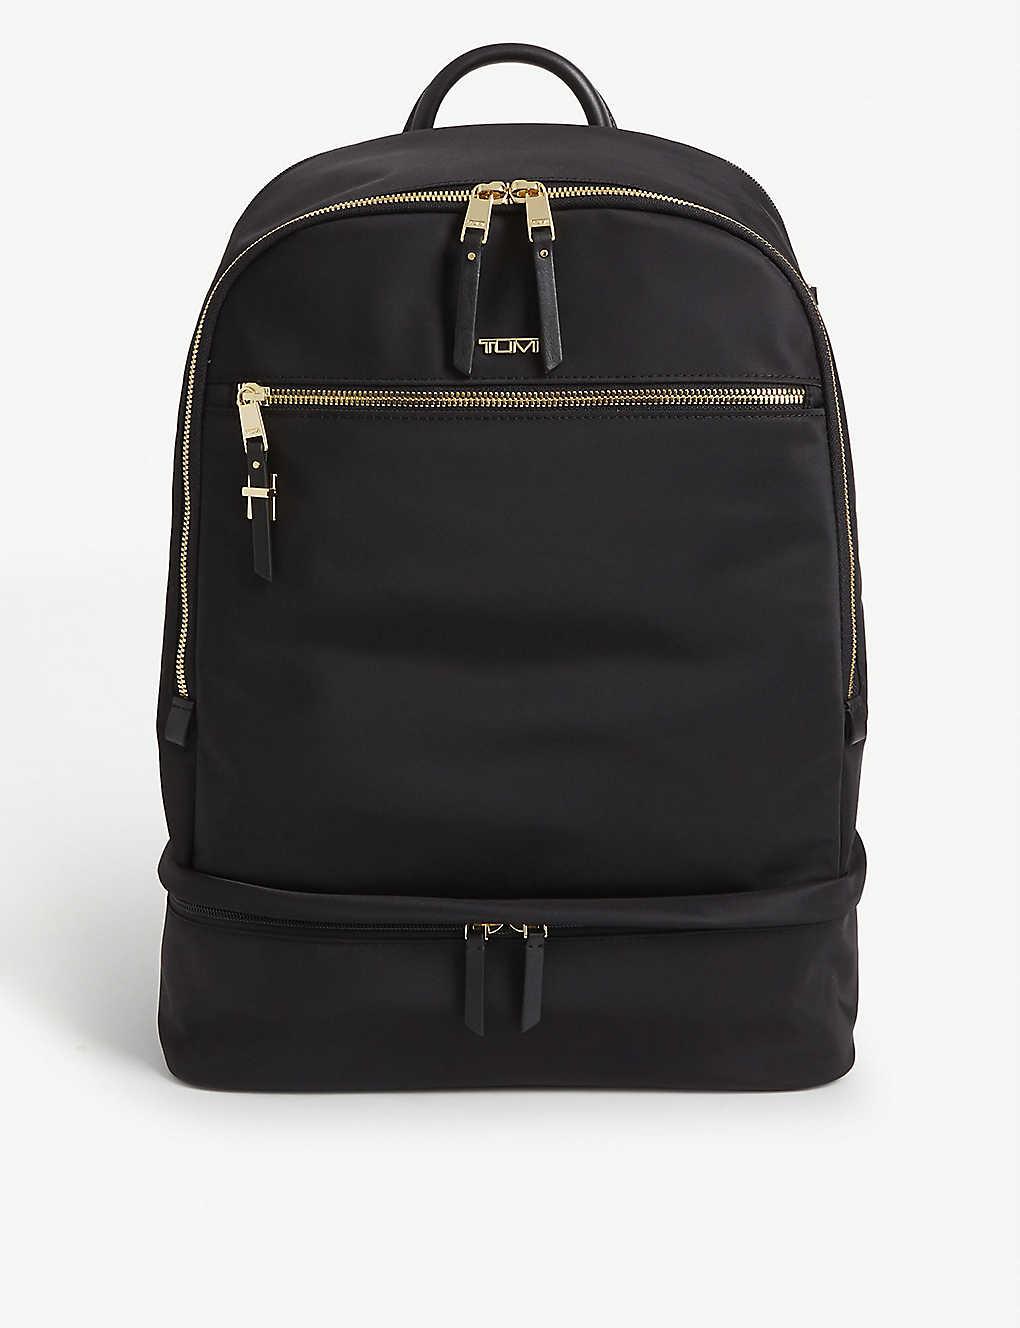 Tumi Synthetic Brooklyn Voyage Nylon Backpack in Black - Lyst